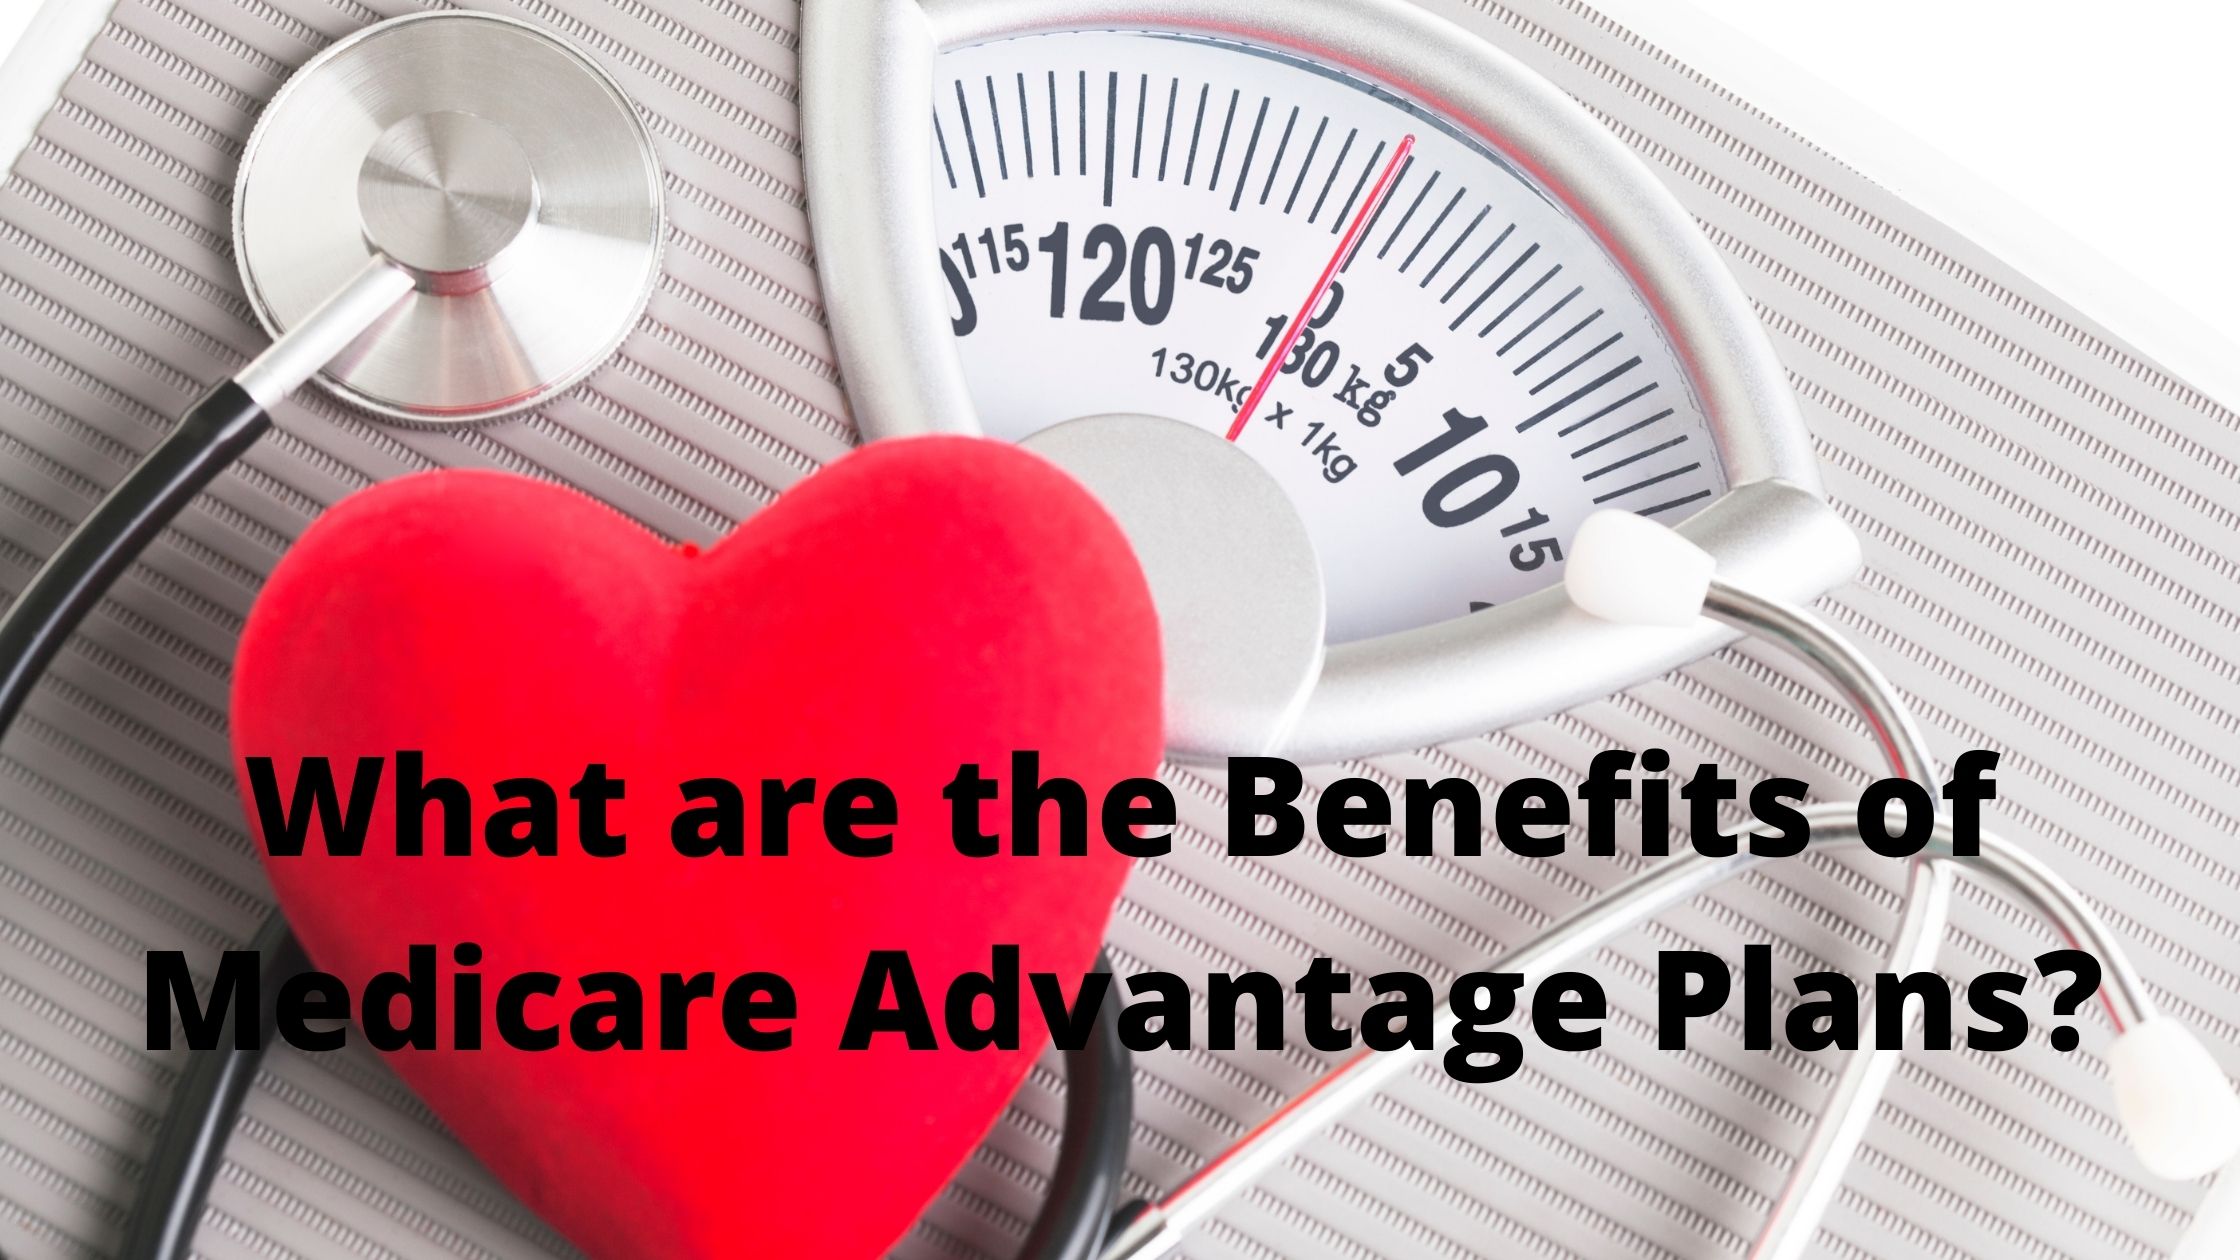 Everything You Need to Know About CMS Medicare Advantage Plans